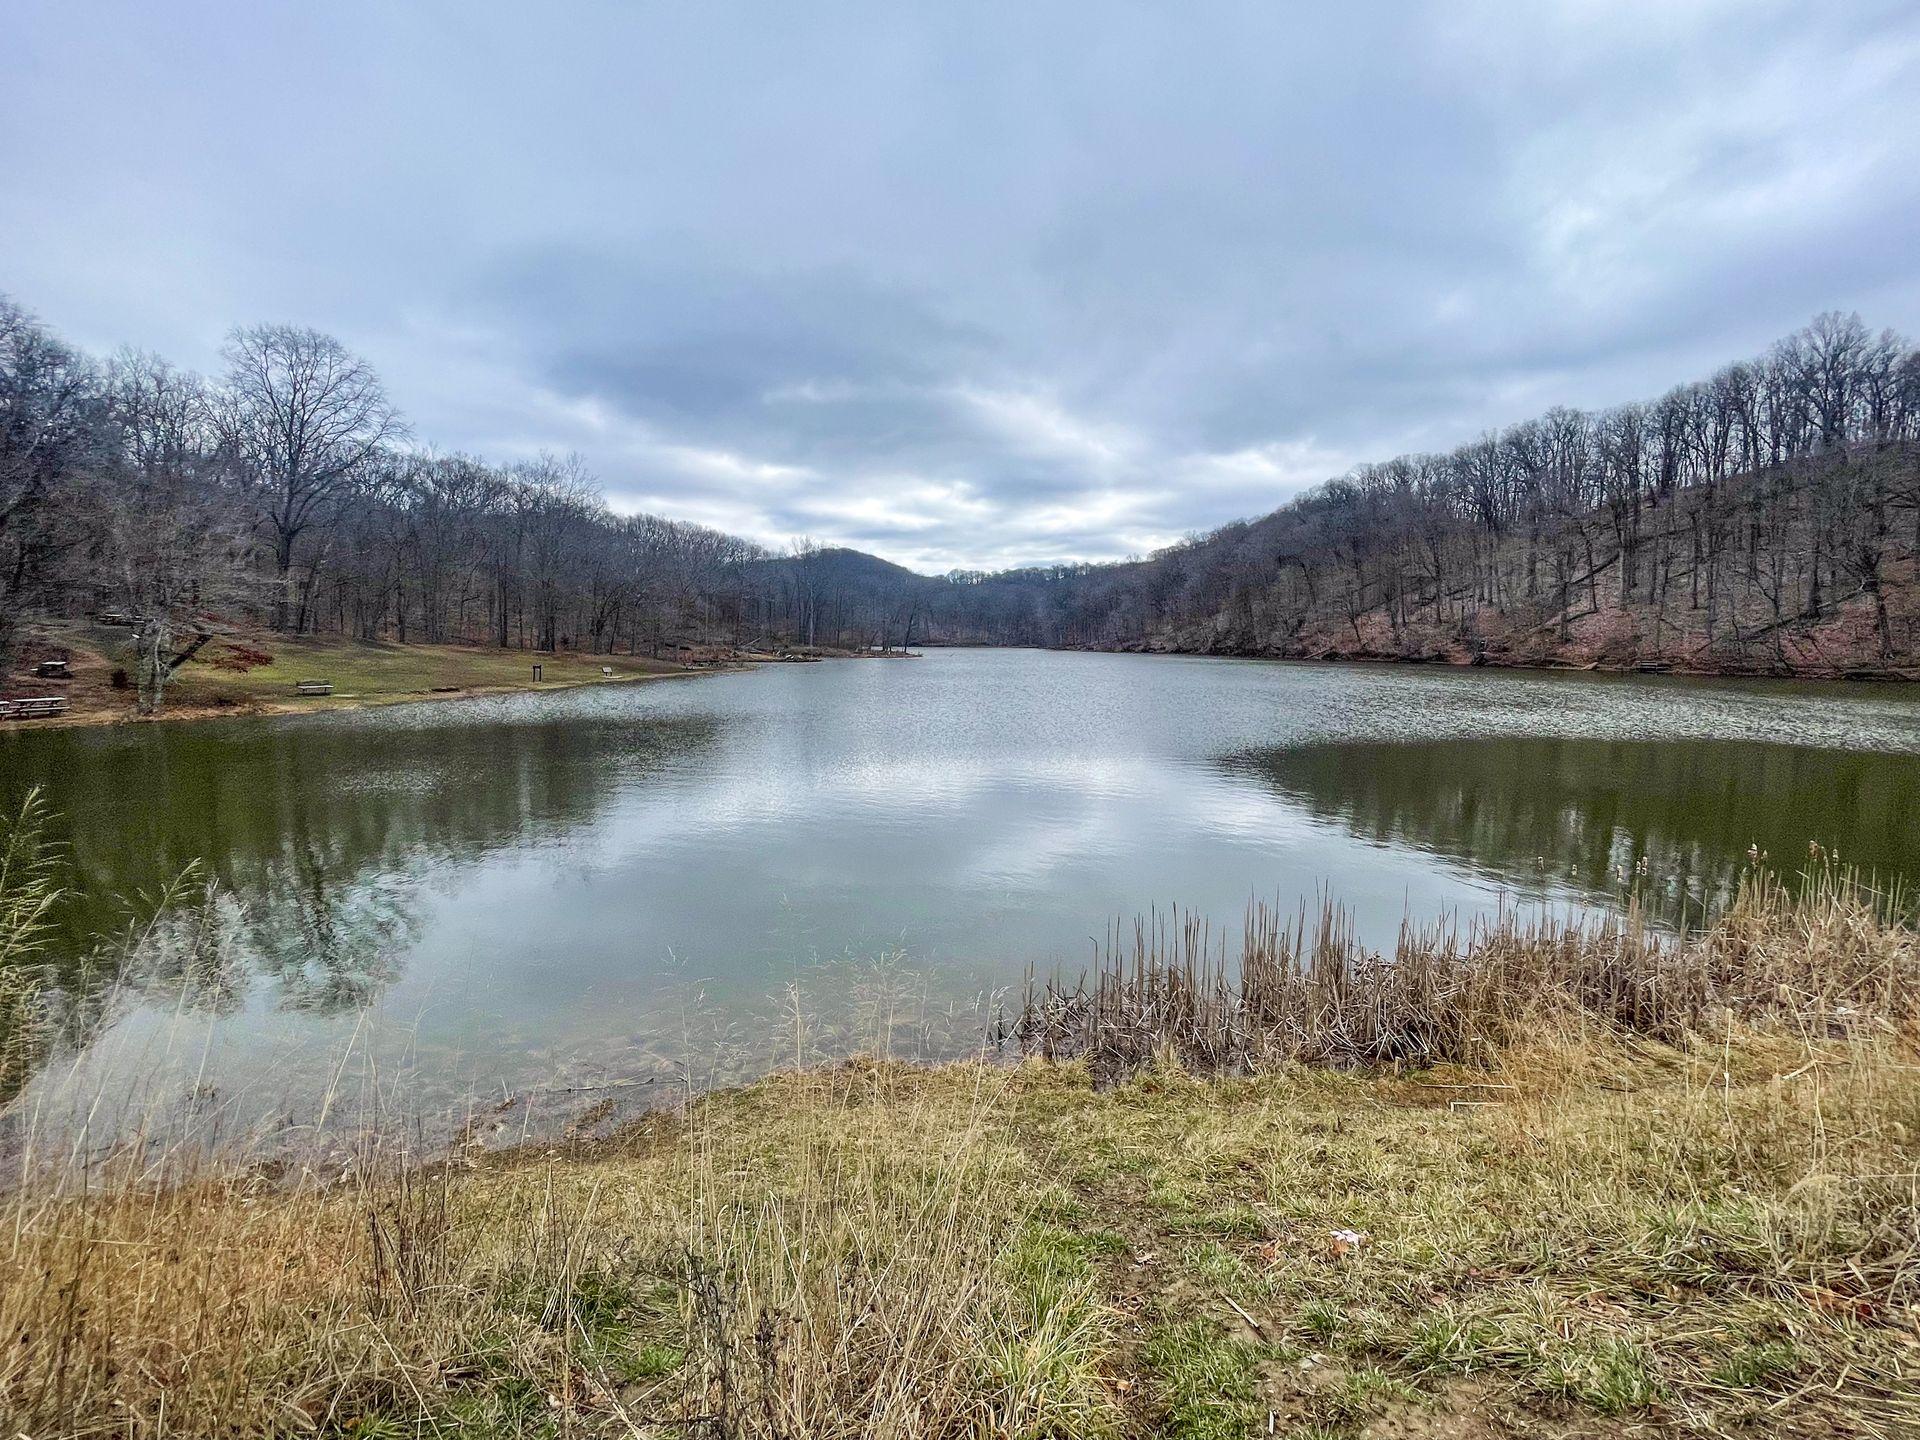 The view of a lake surrounded by trees in Brown County State Park.